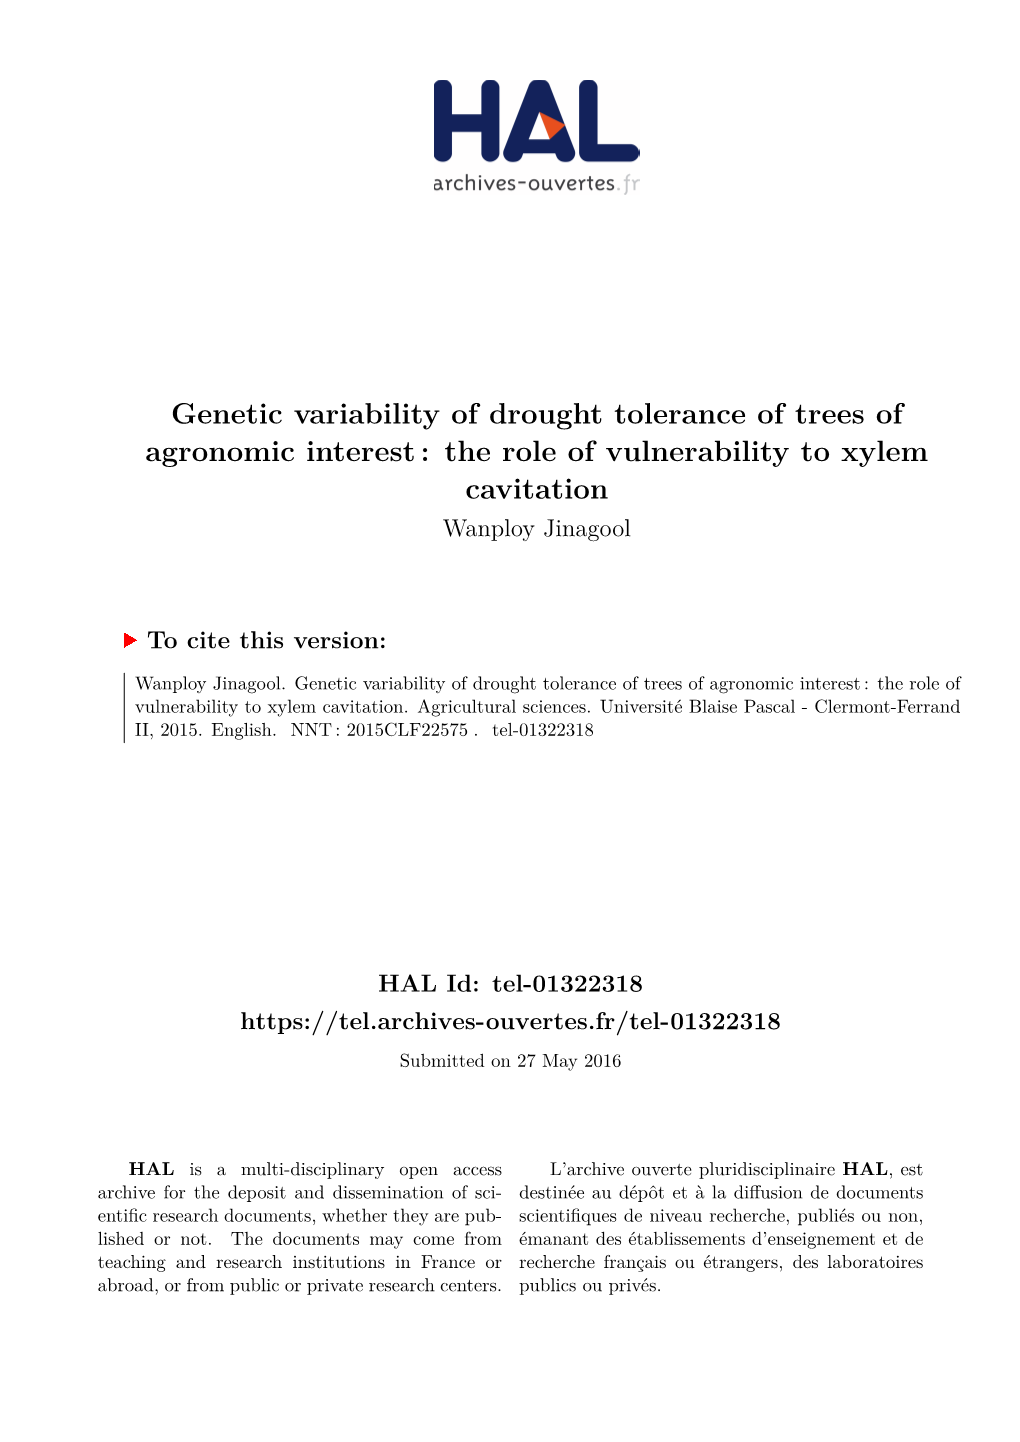 Genetic Variability of Drought Tolerance of Trees of Agronomic Interest: the Role of Vulnerability to Xylem Cavitation